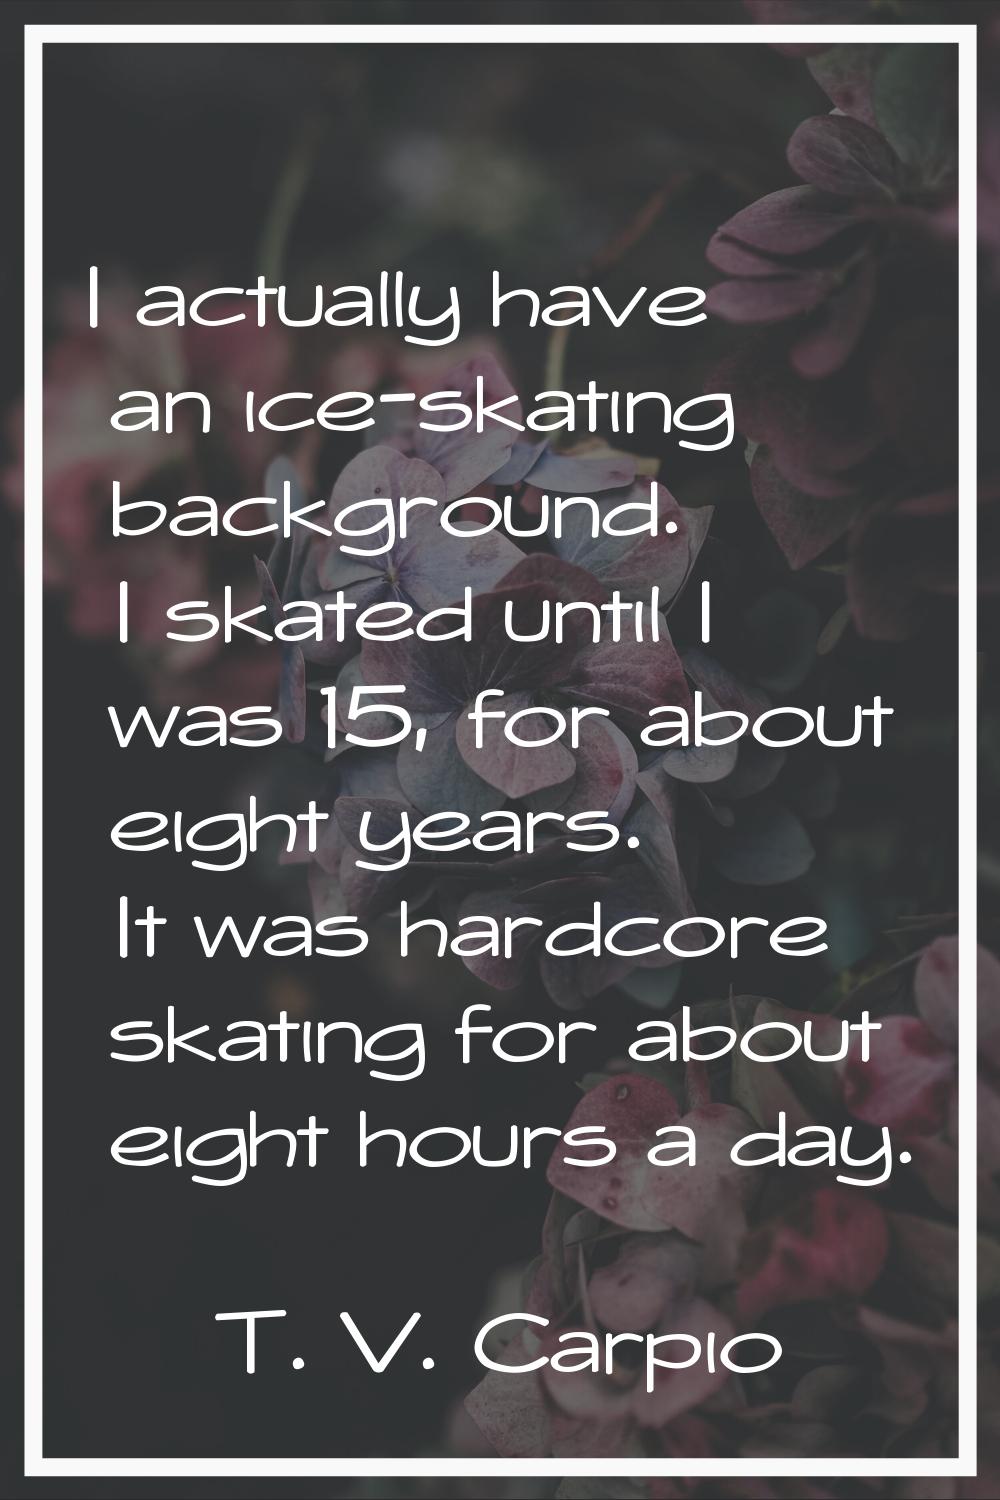 I actually have an ice-skating background. I skated until I was 15, for about eight years. It was h